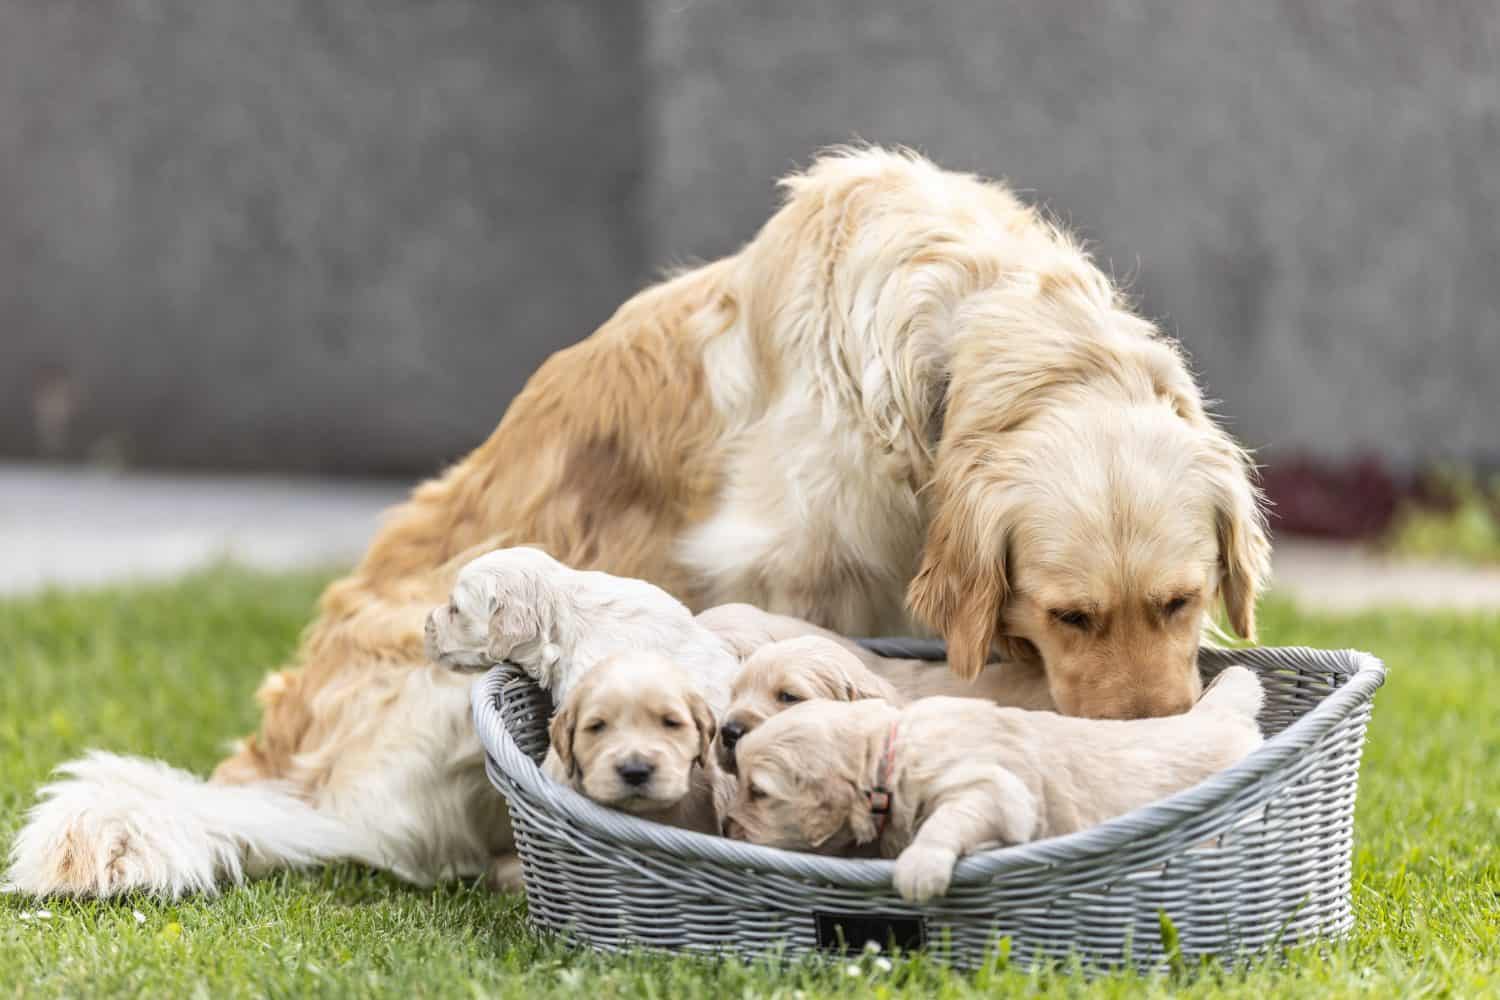 Canine mother is taking care of her fluffy puppies.